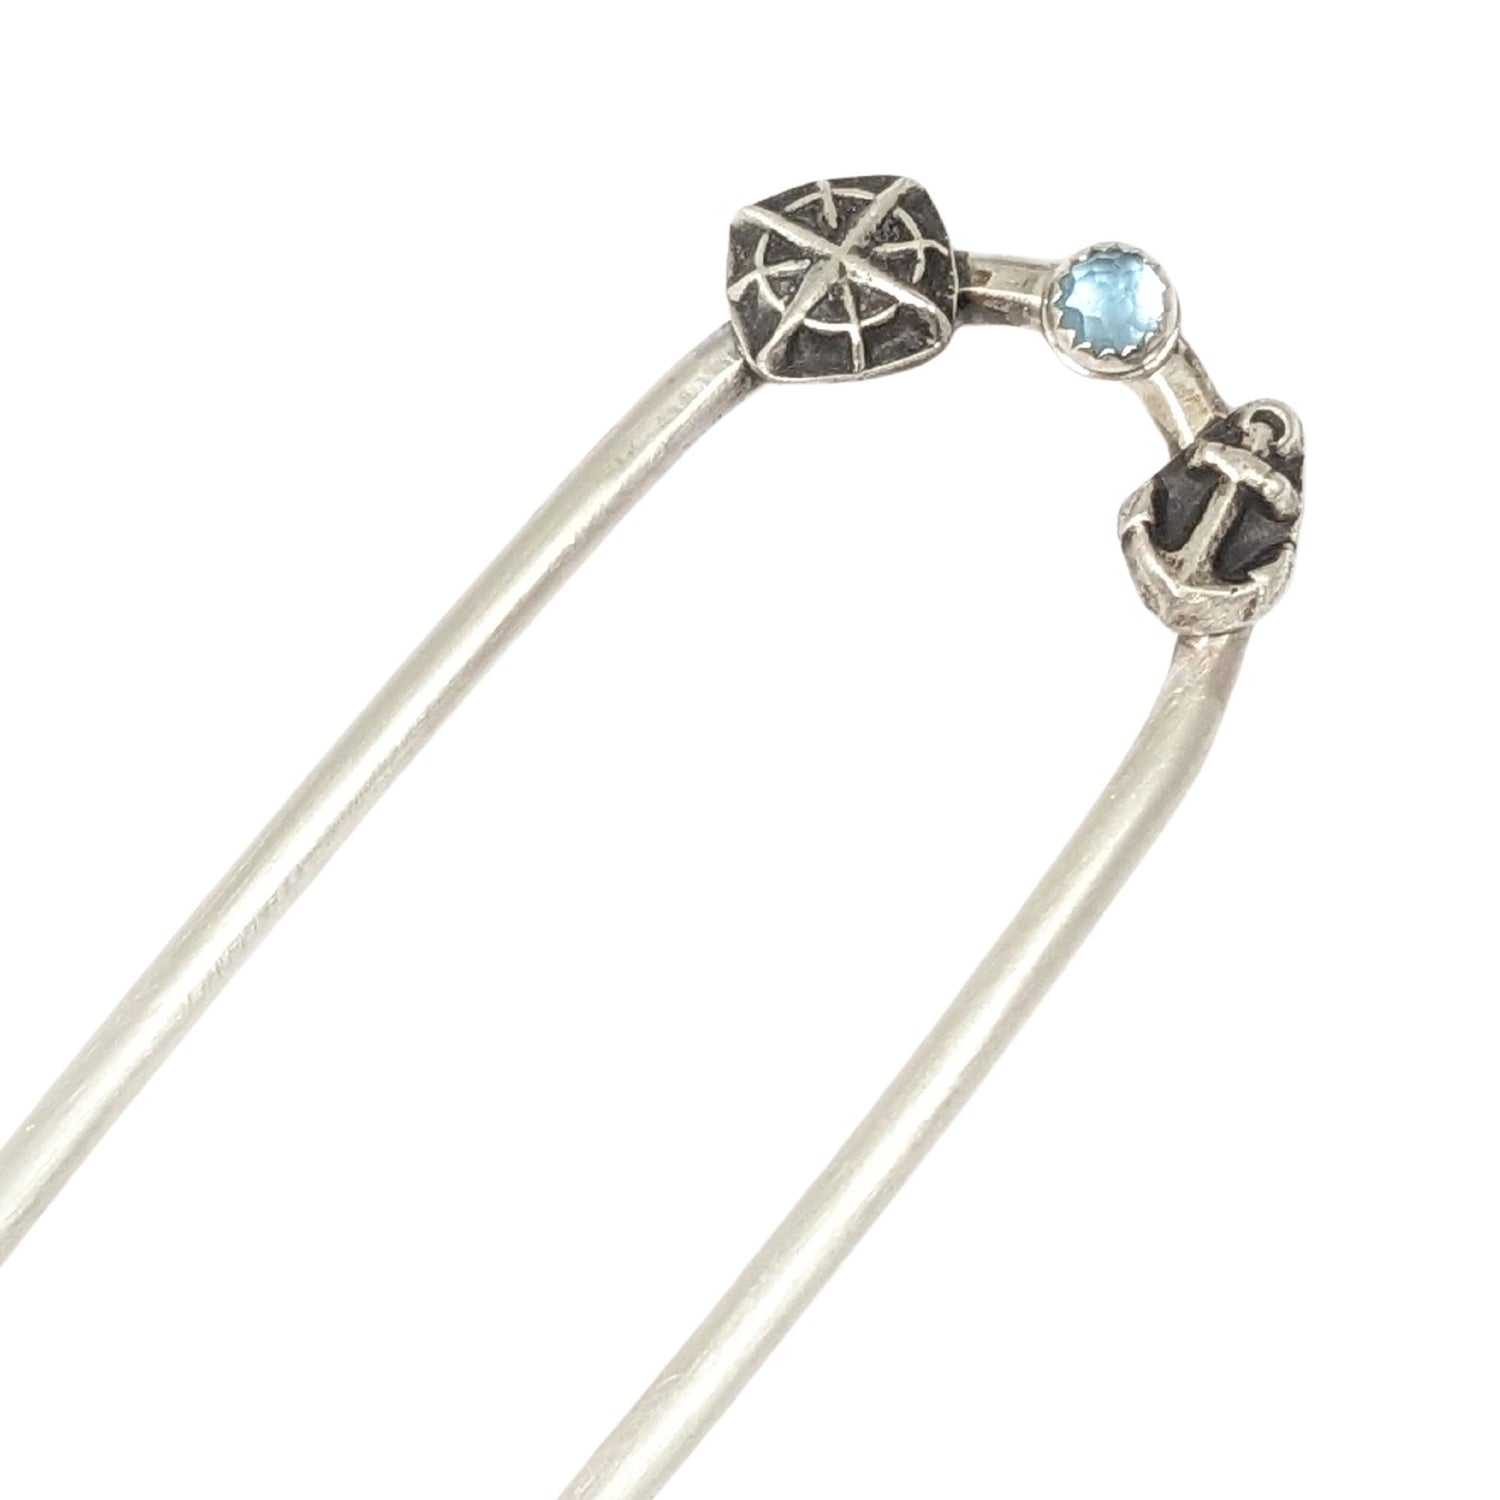 Sterling silver hair fork with three small design elements. Left is a silver compass rose, center is a rose cut blue topaz gemstone, right is a silver anchor